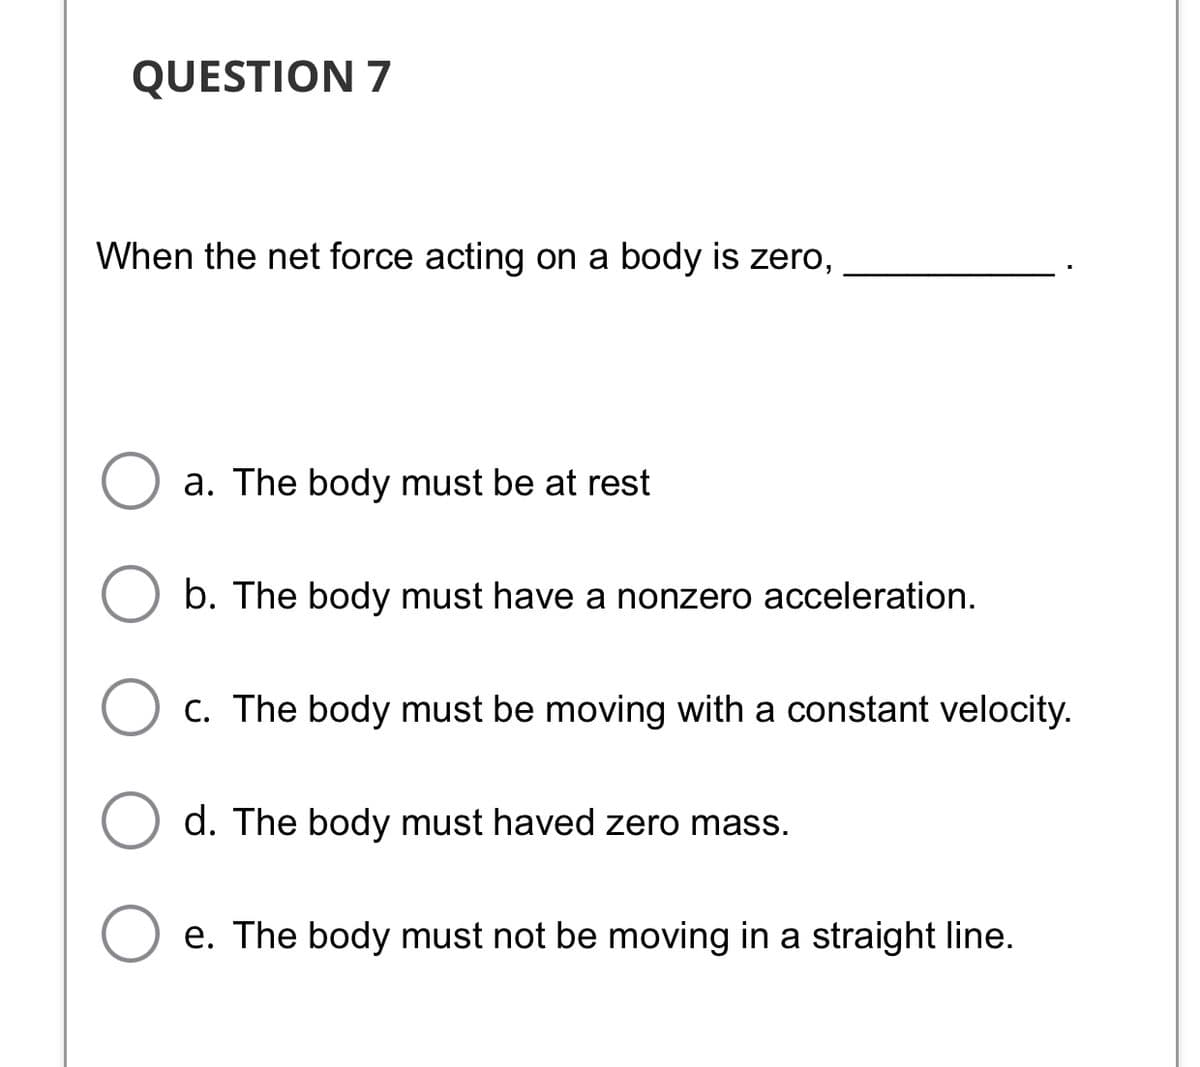 QUESTION 7
When the net force acting on a body is zero,
a. The body must be at rest
b. The body must have a nonzero acceleration.
C. The body must be moving with a constant velocity.
d. The body must haved zero mass.
O e. The body must not be moving in a straight line.
